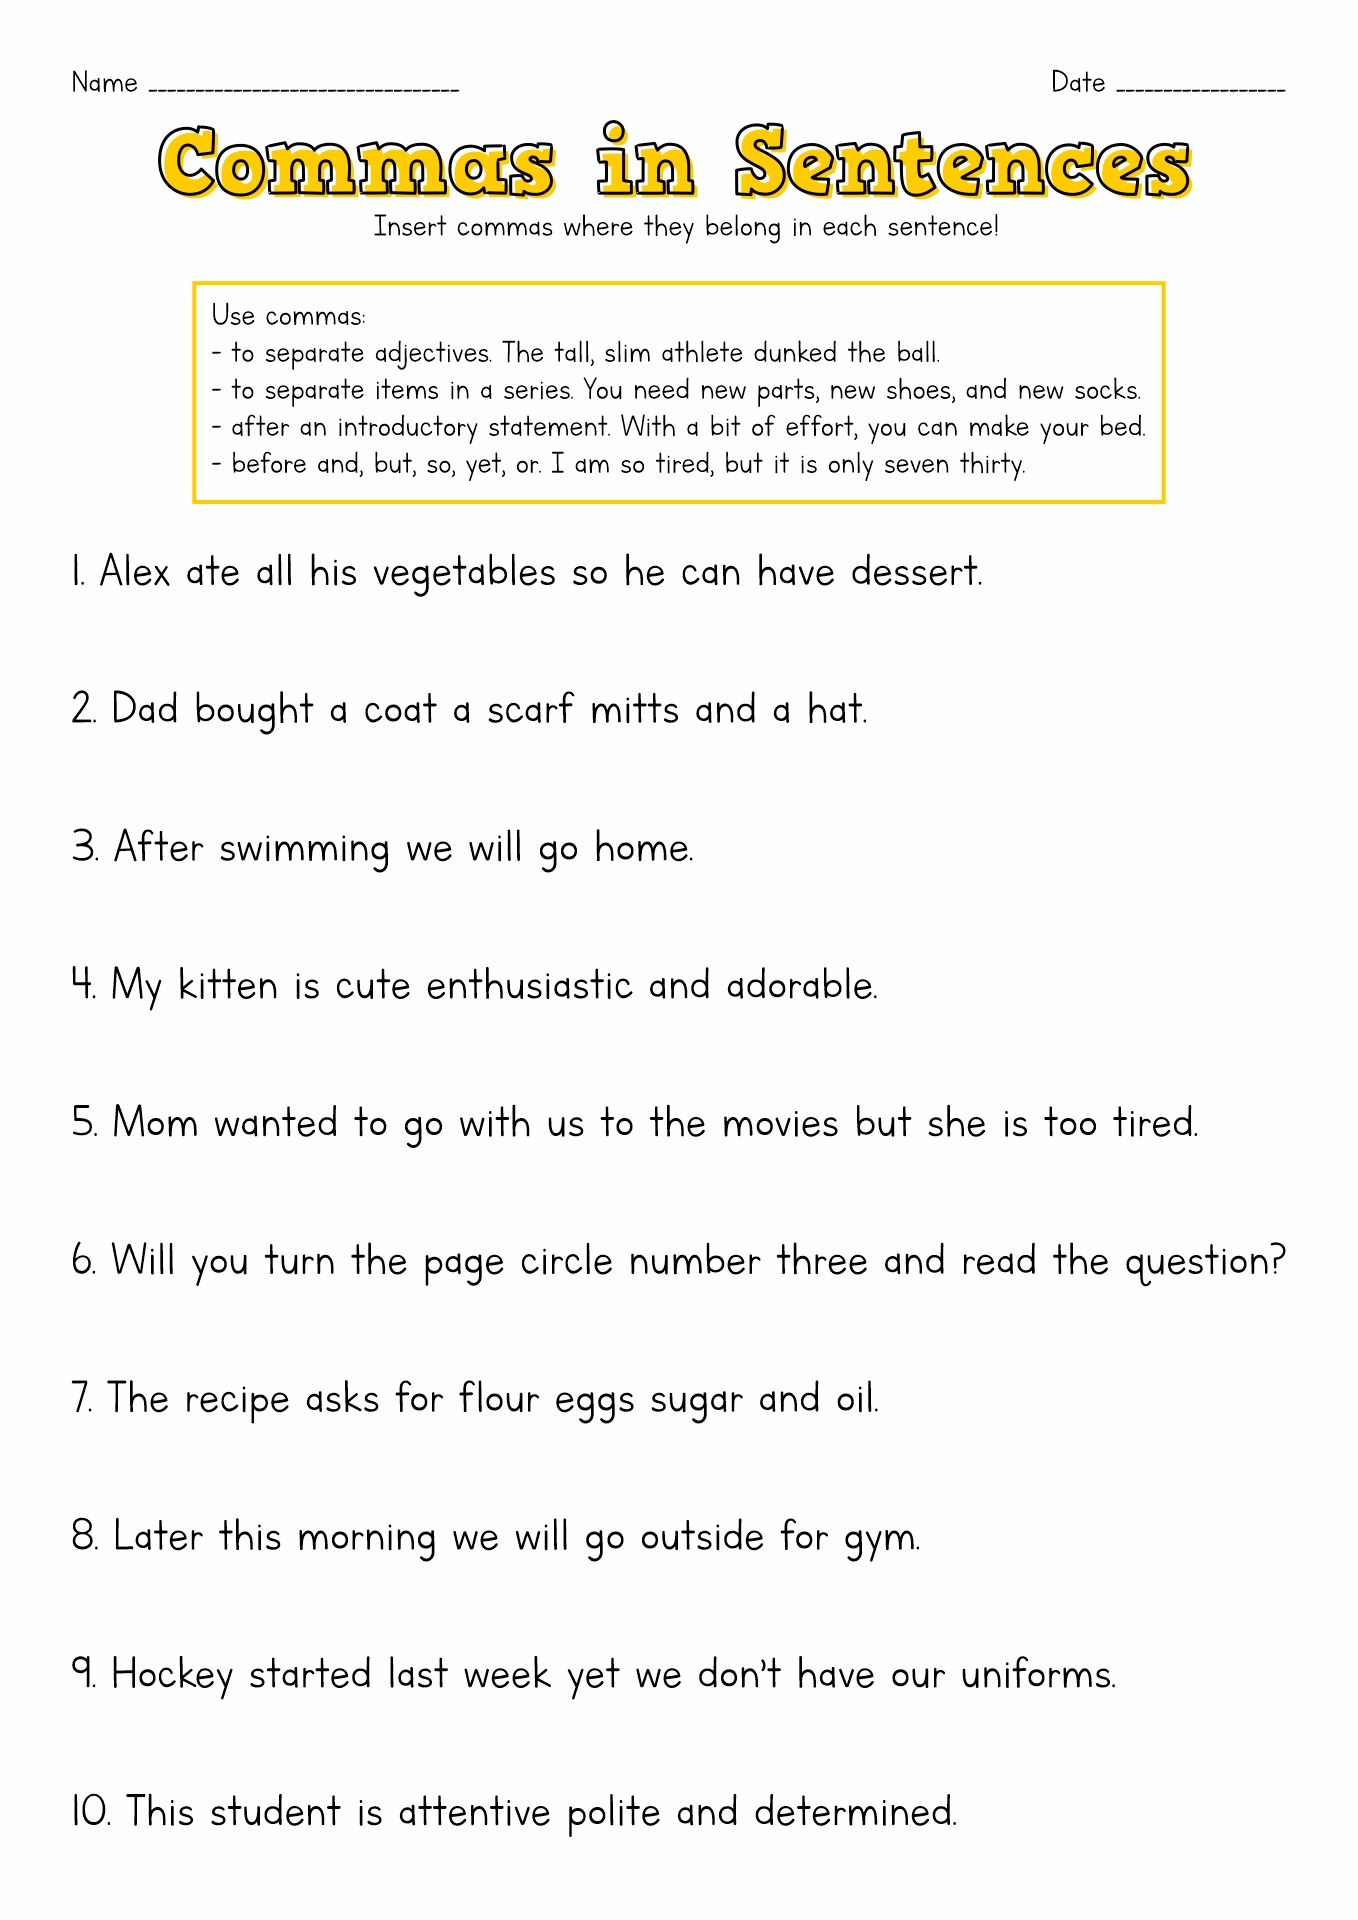 12 Best Images of Free Printable Comma Worksheets Comma Worksheets